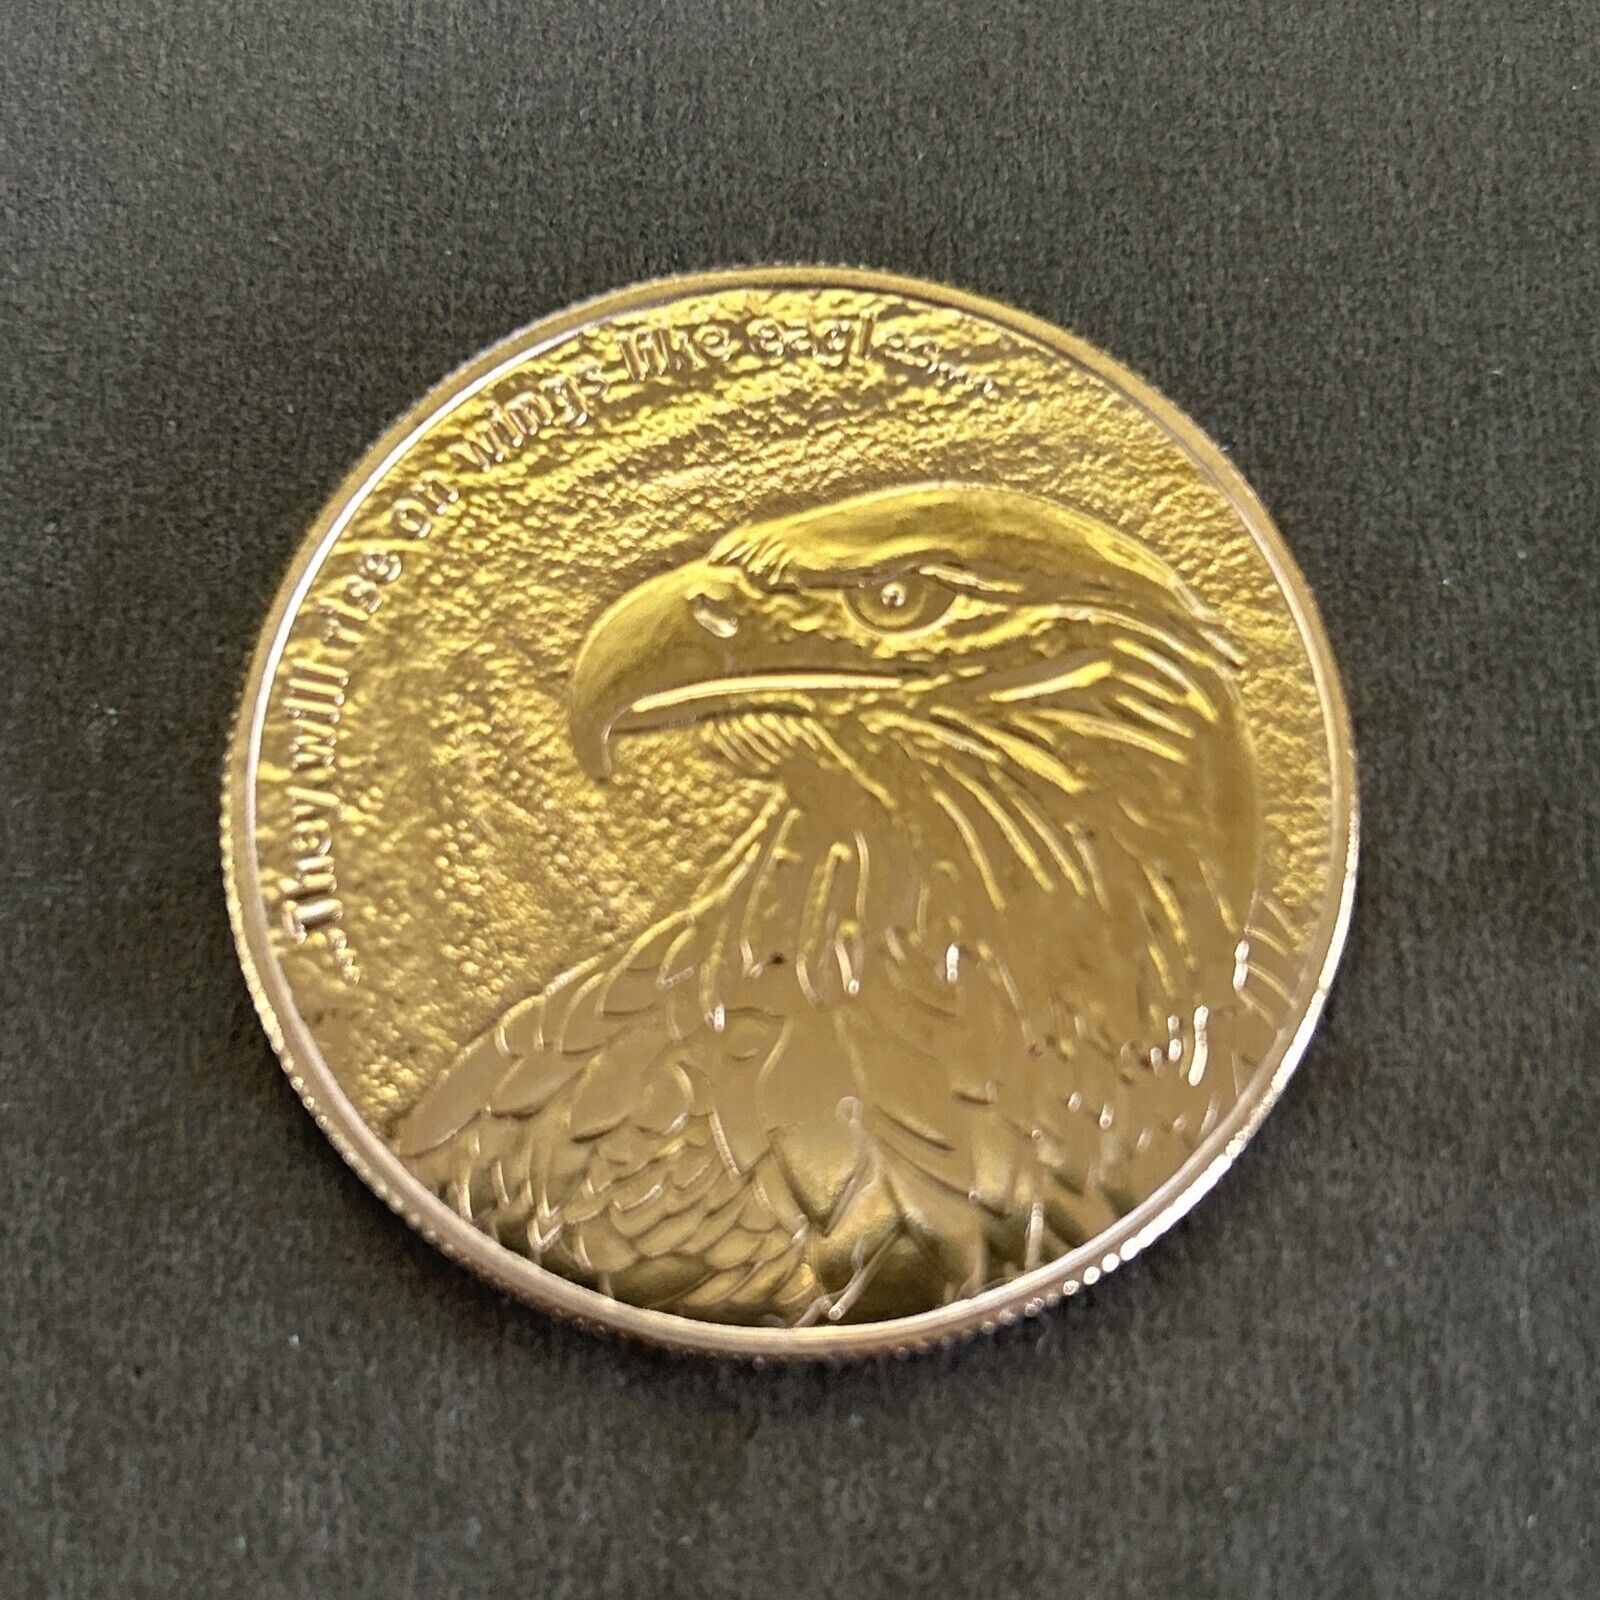 Christian Eagle Antique Gold Plated Challenge Coin - Isaiah 40:31